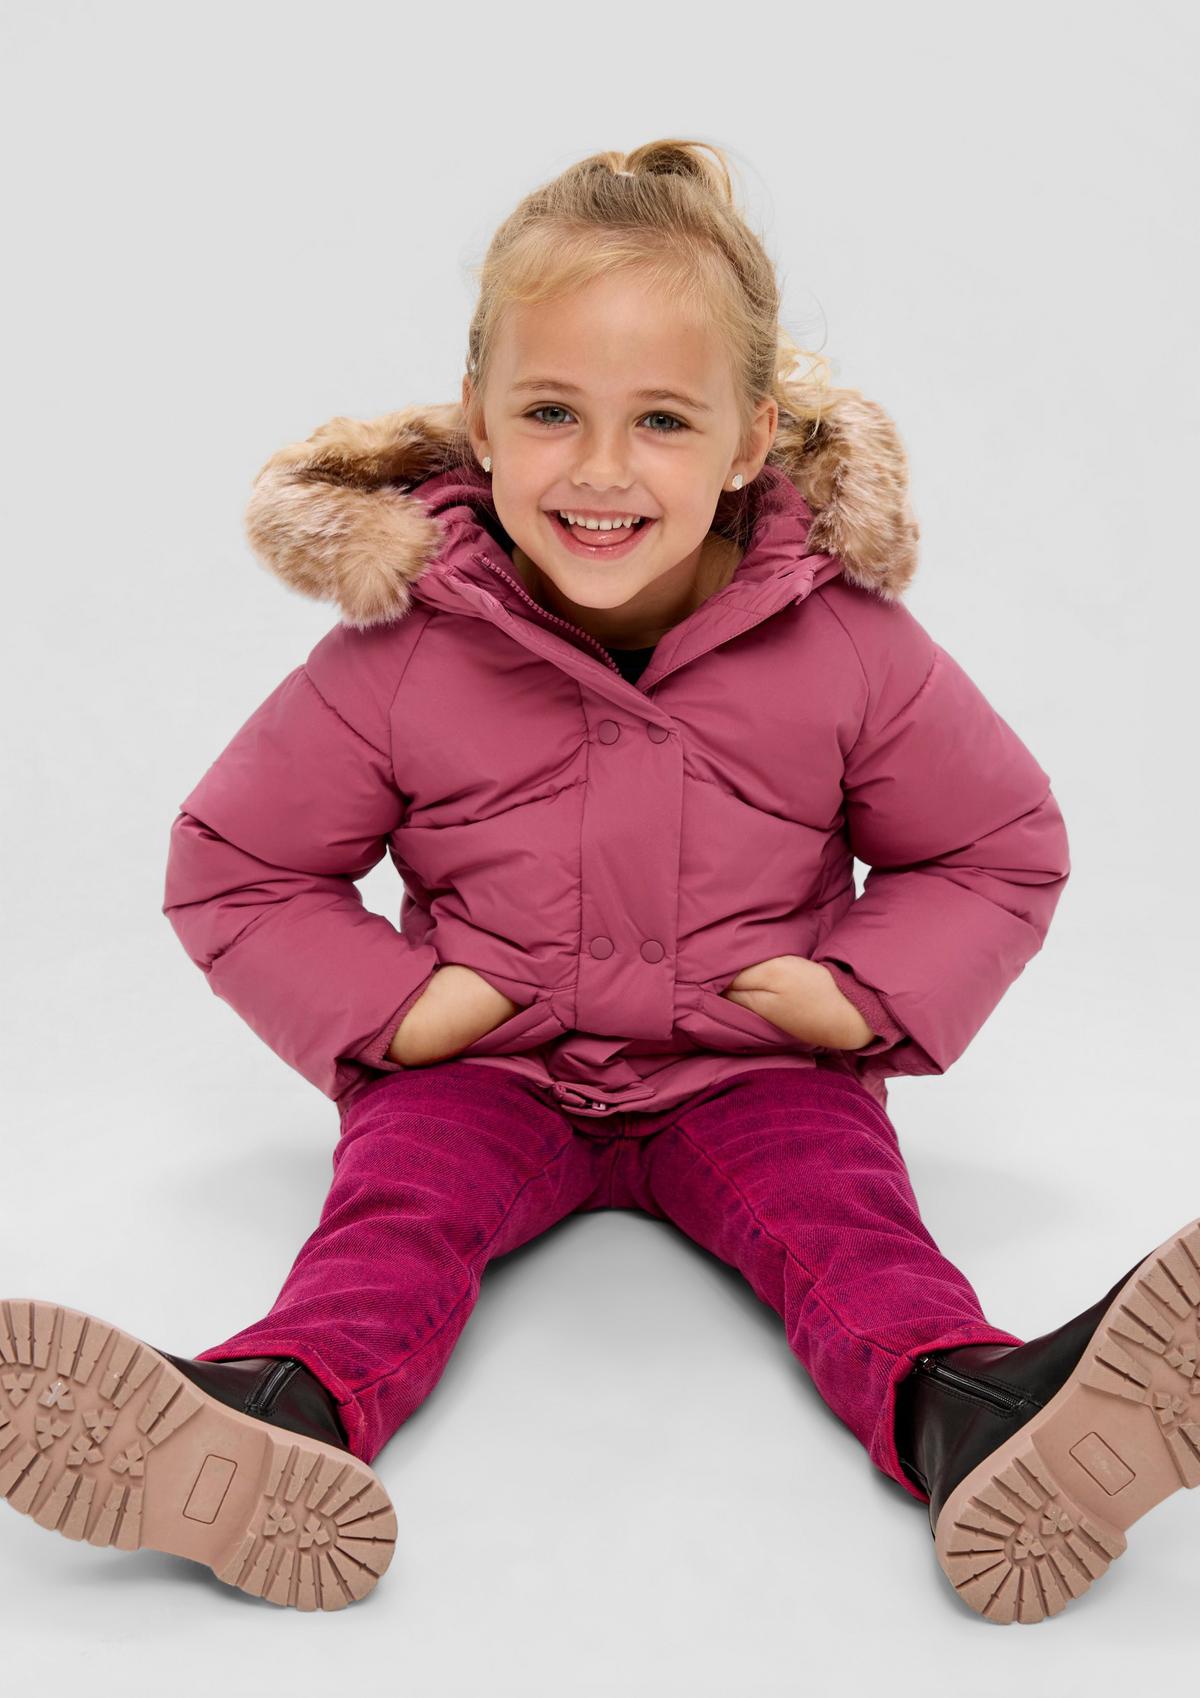 Kids\' fashion and clothing for girls and boys